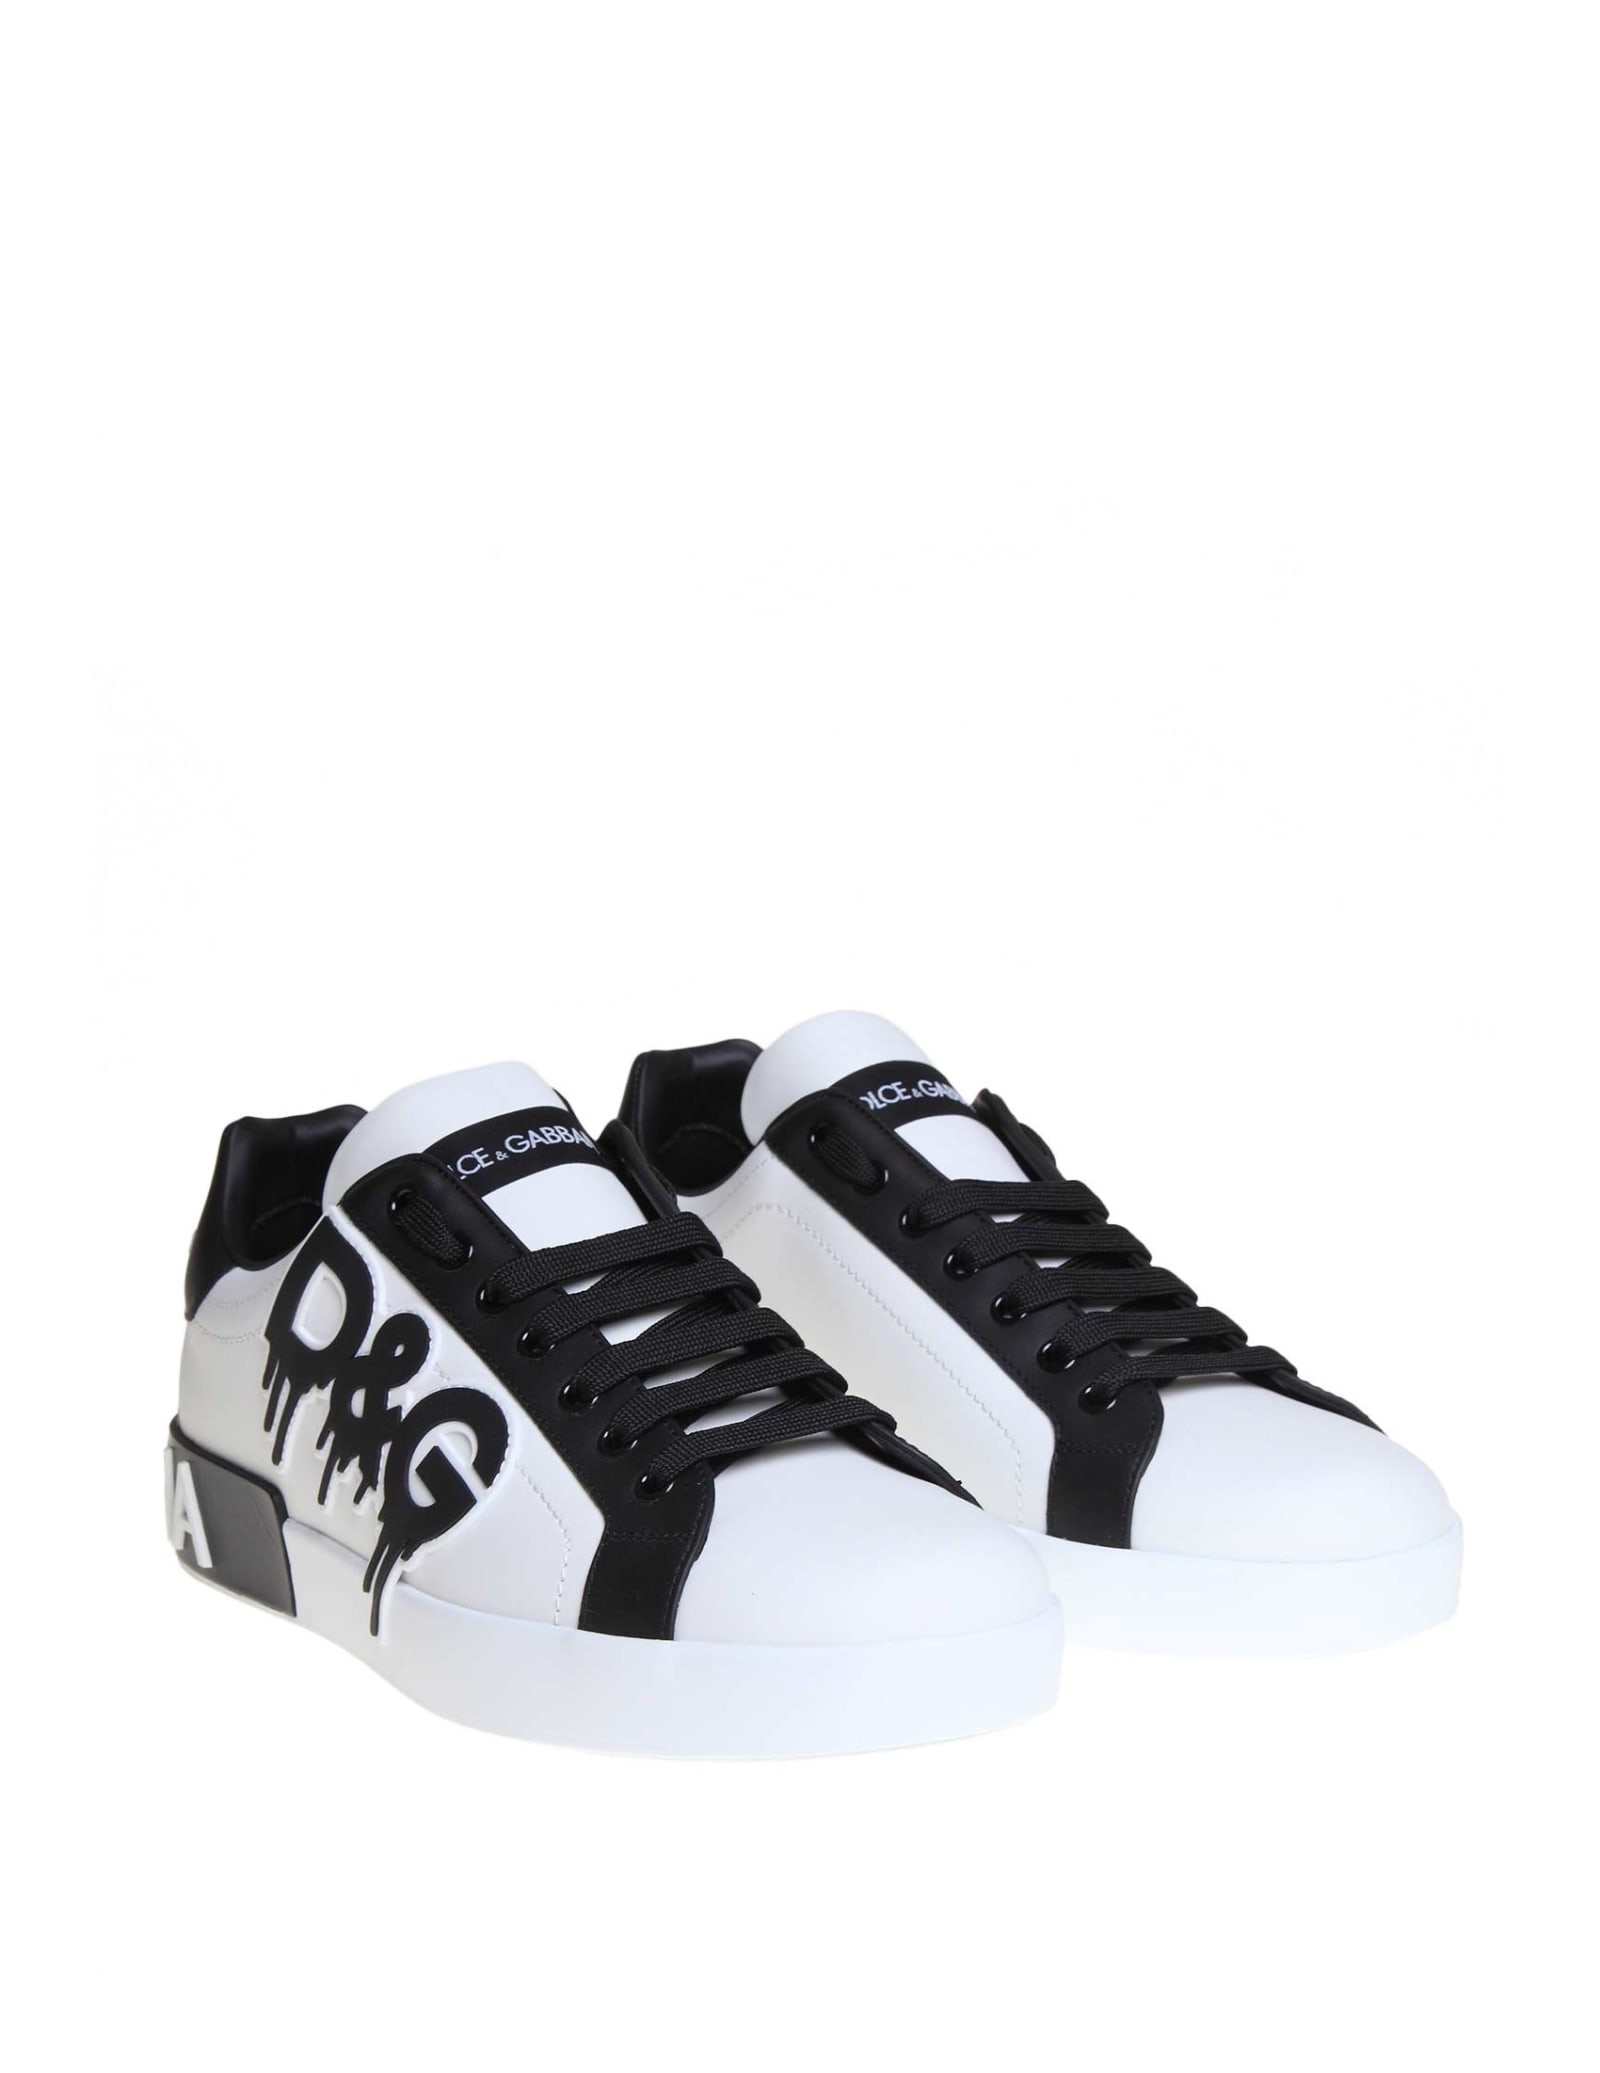 dolce gabbana black and white sneakers